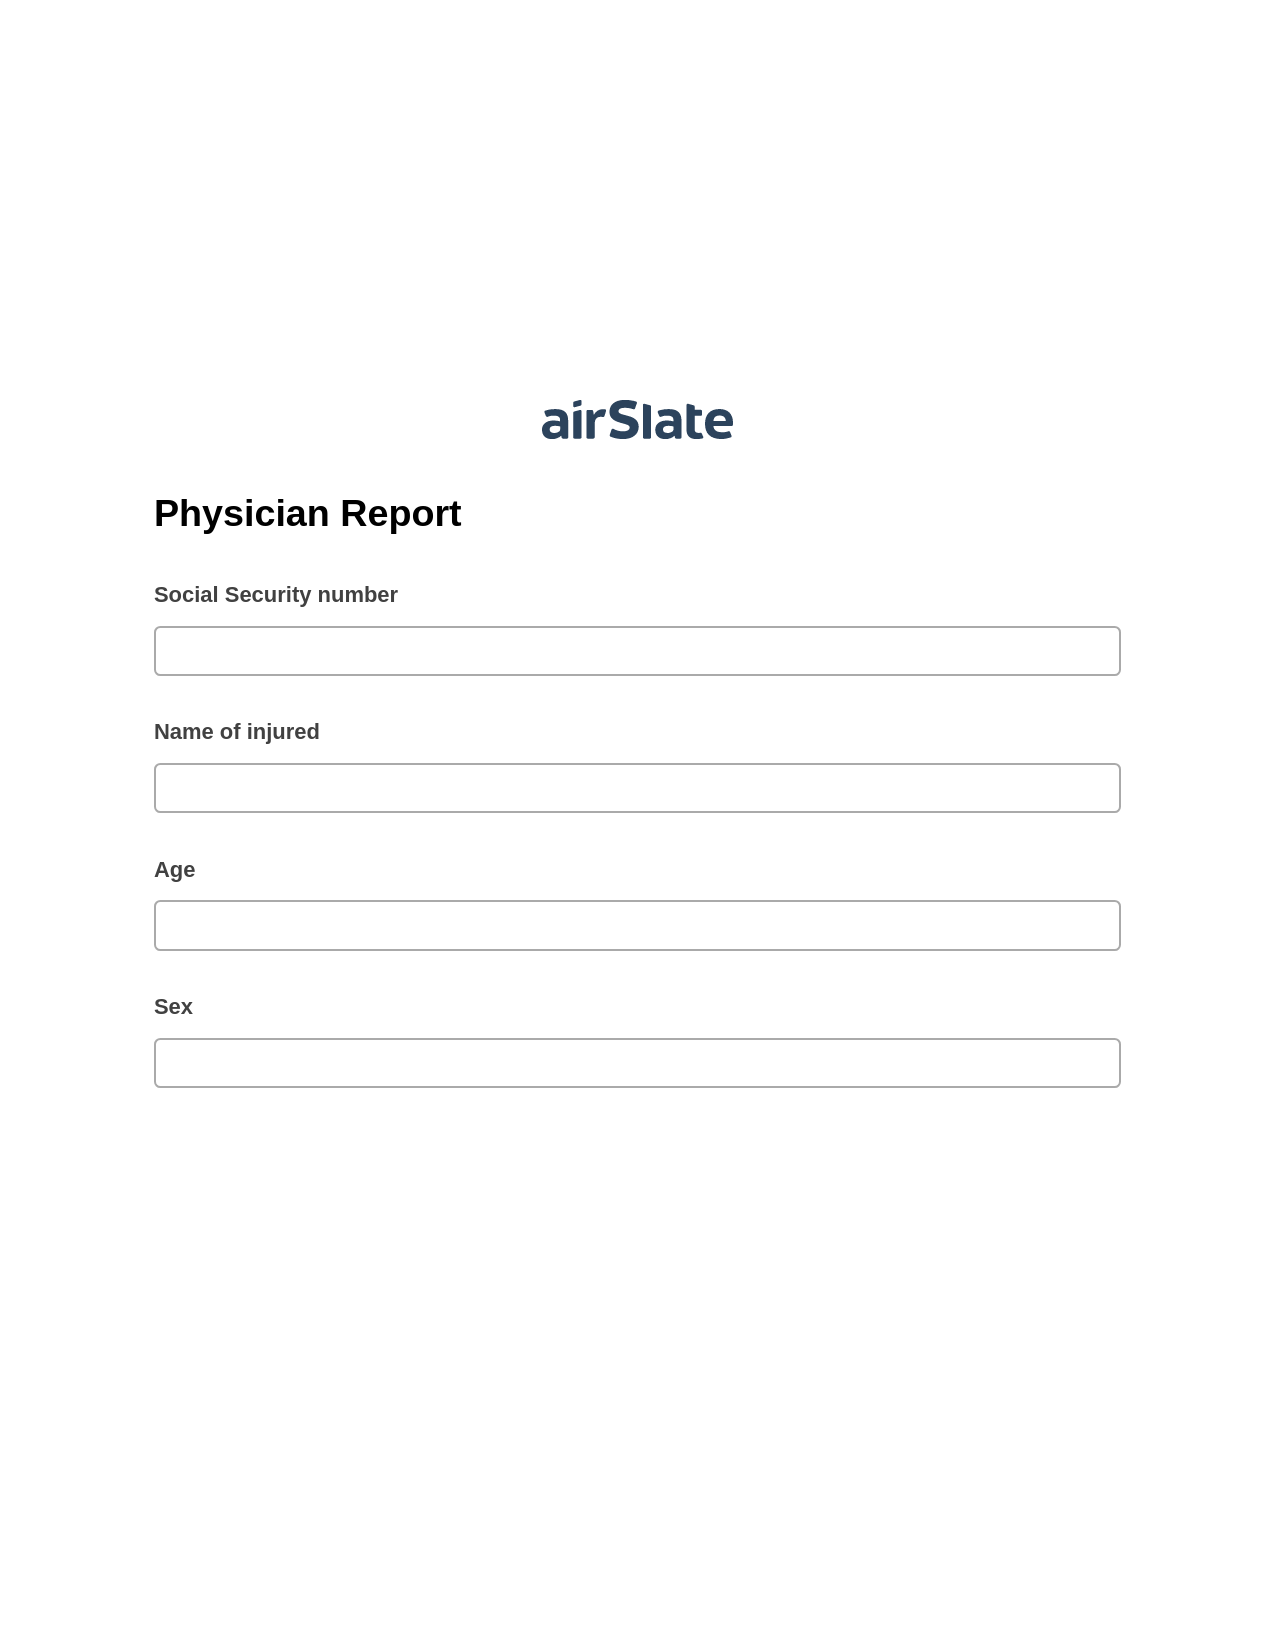 Physician Report Pre-fill from Google Sheets Bot, Update NetSuite Record Bot, Archive to Dropbox Bot